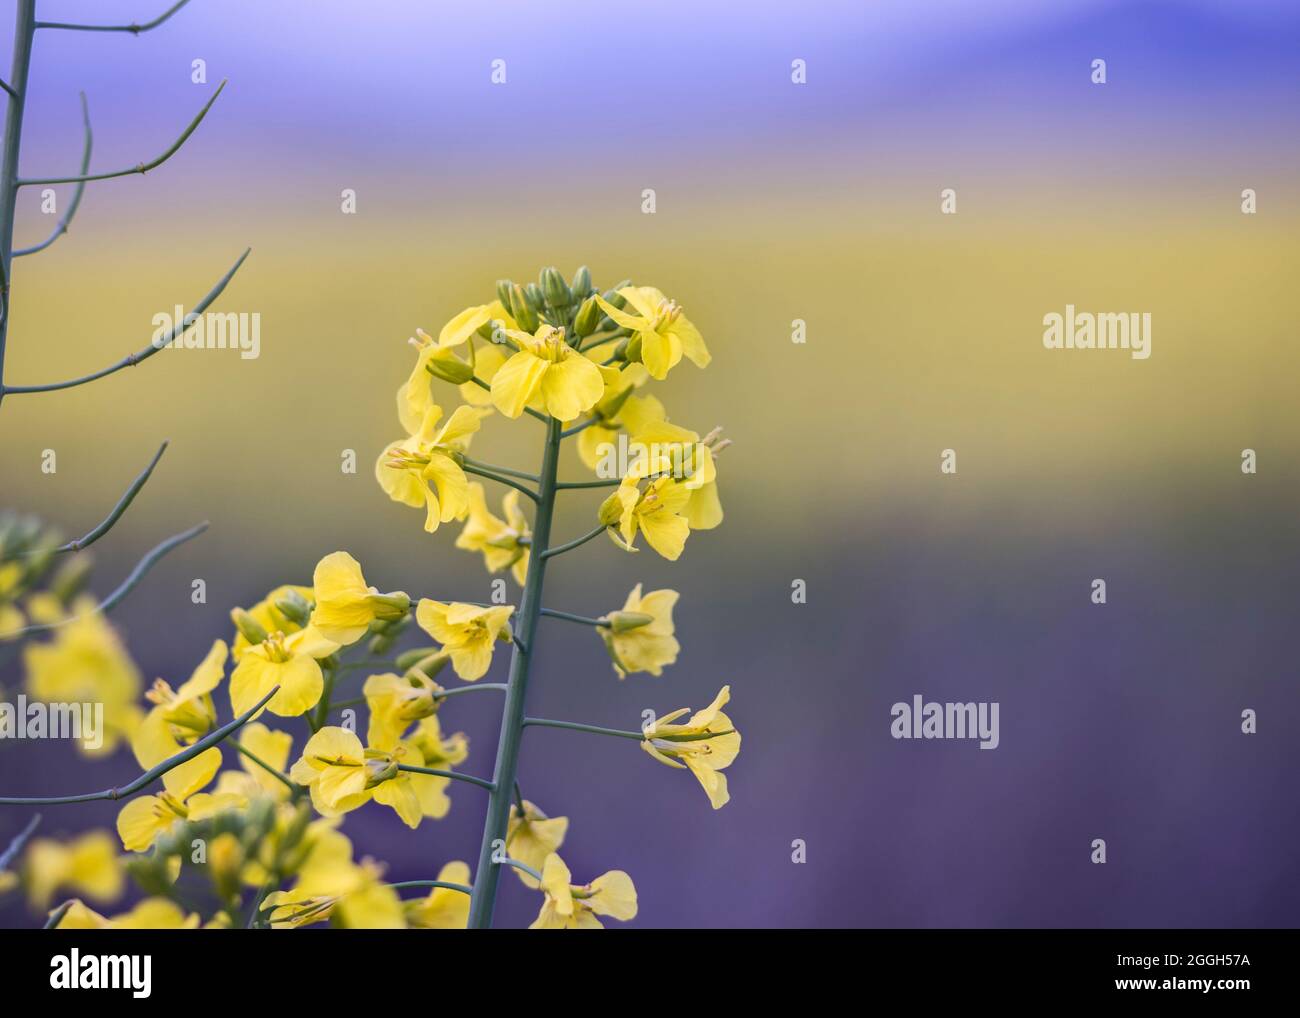 Canola field, bright yellow flowers of the Rapeseed (Brassica napus) plant Stock Photo